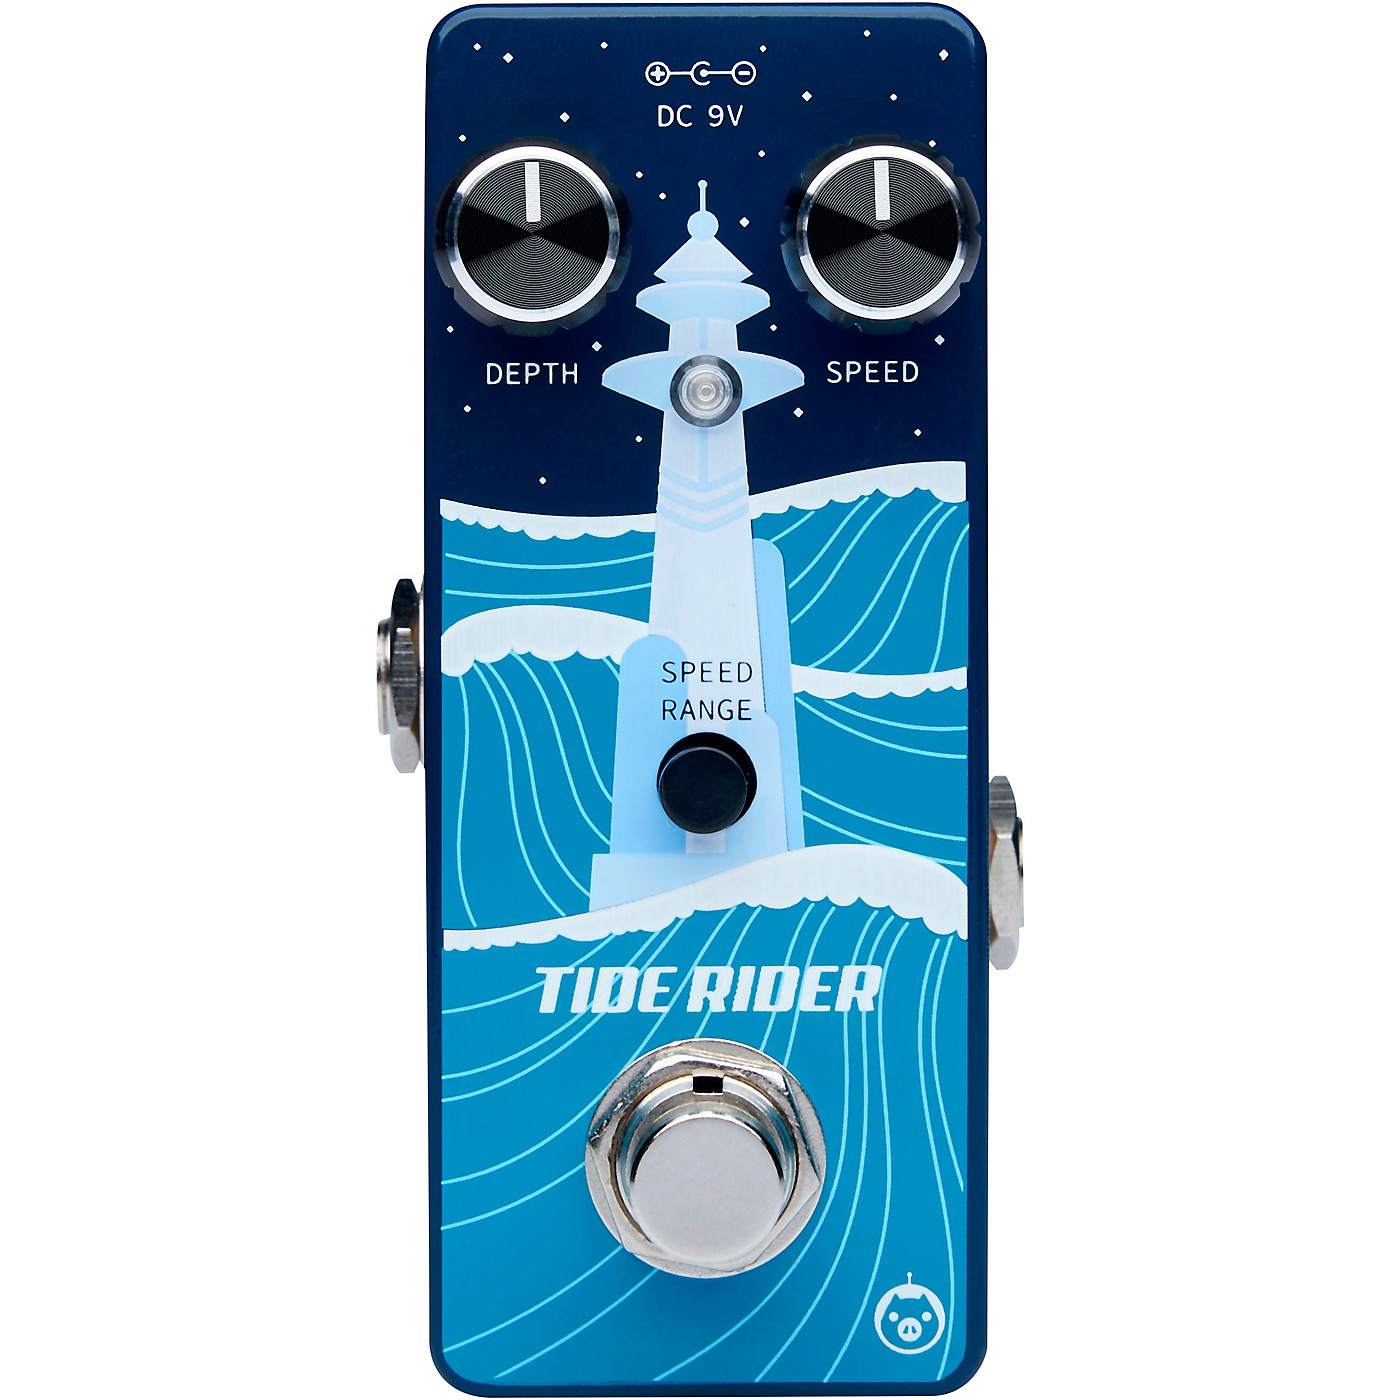 Pigtronix Tide Rider Modulation Effects Pedal thumbnail